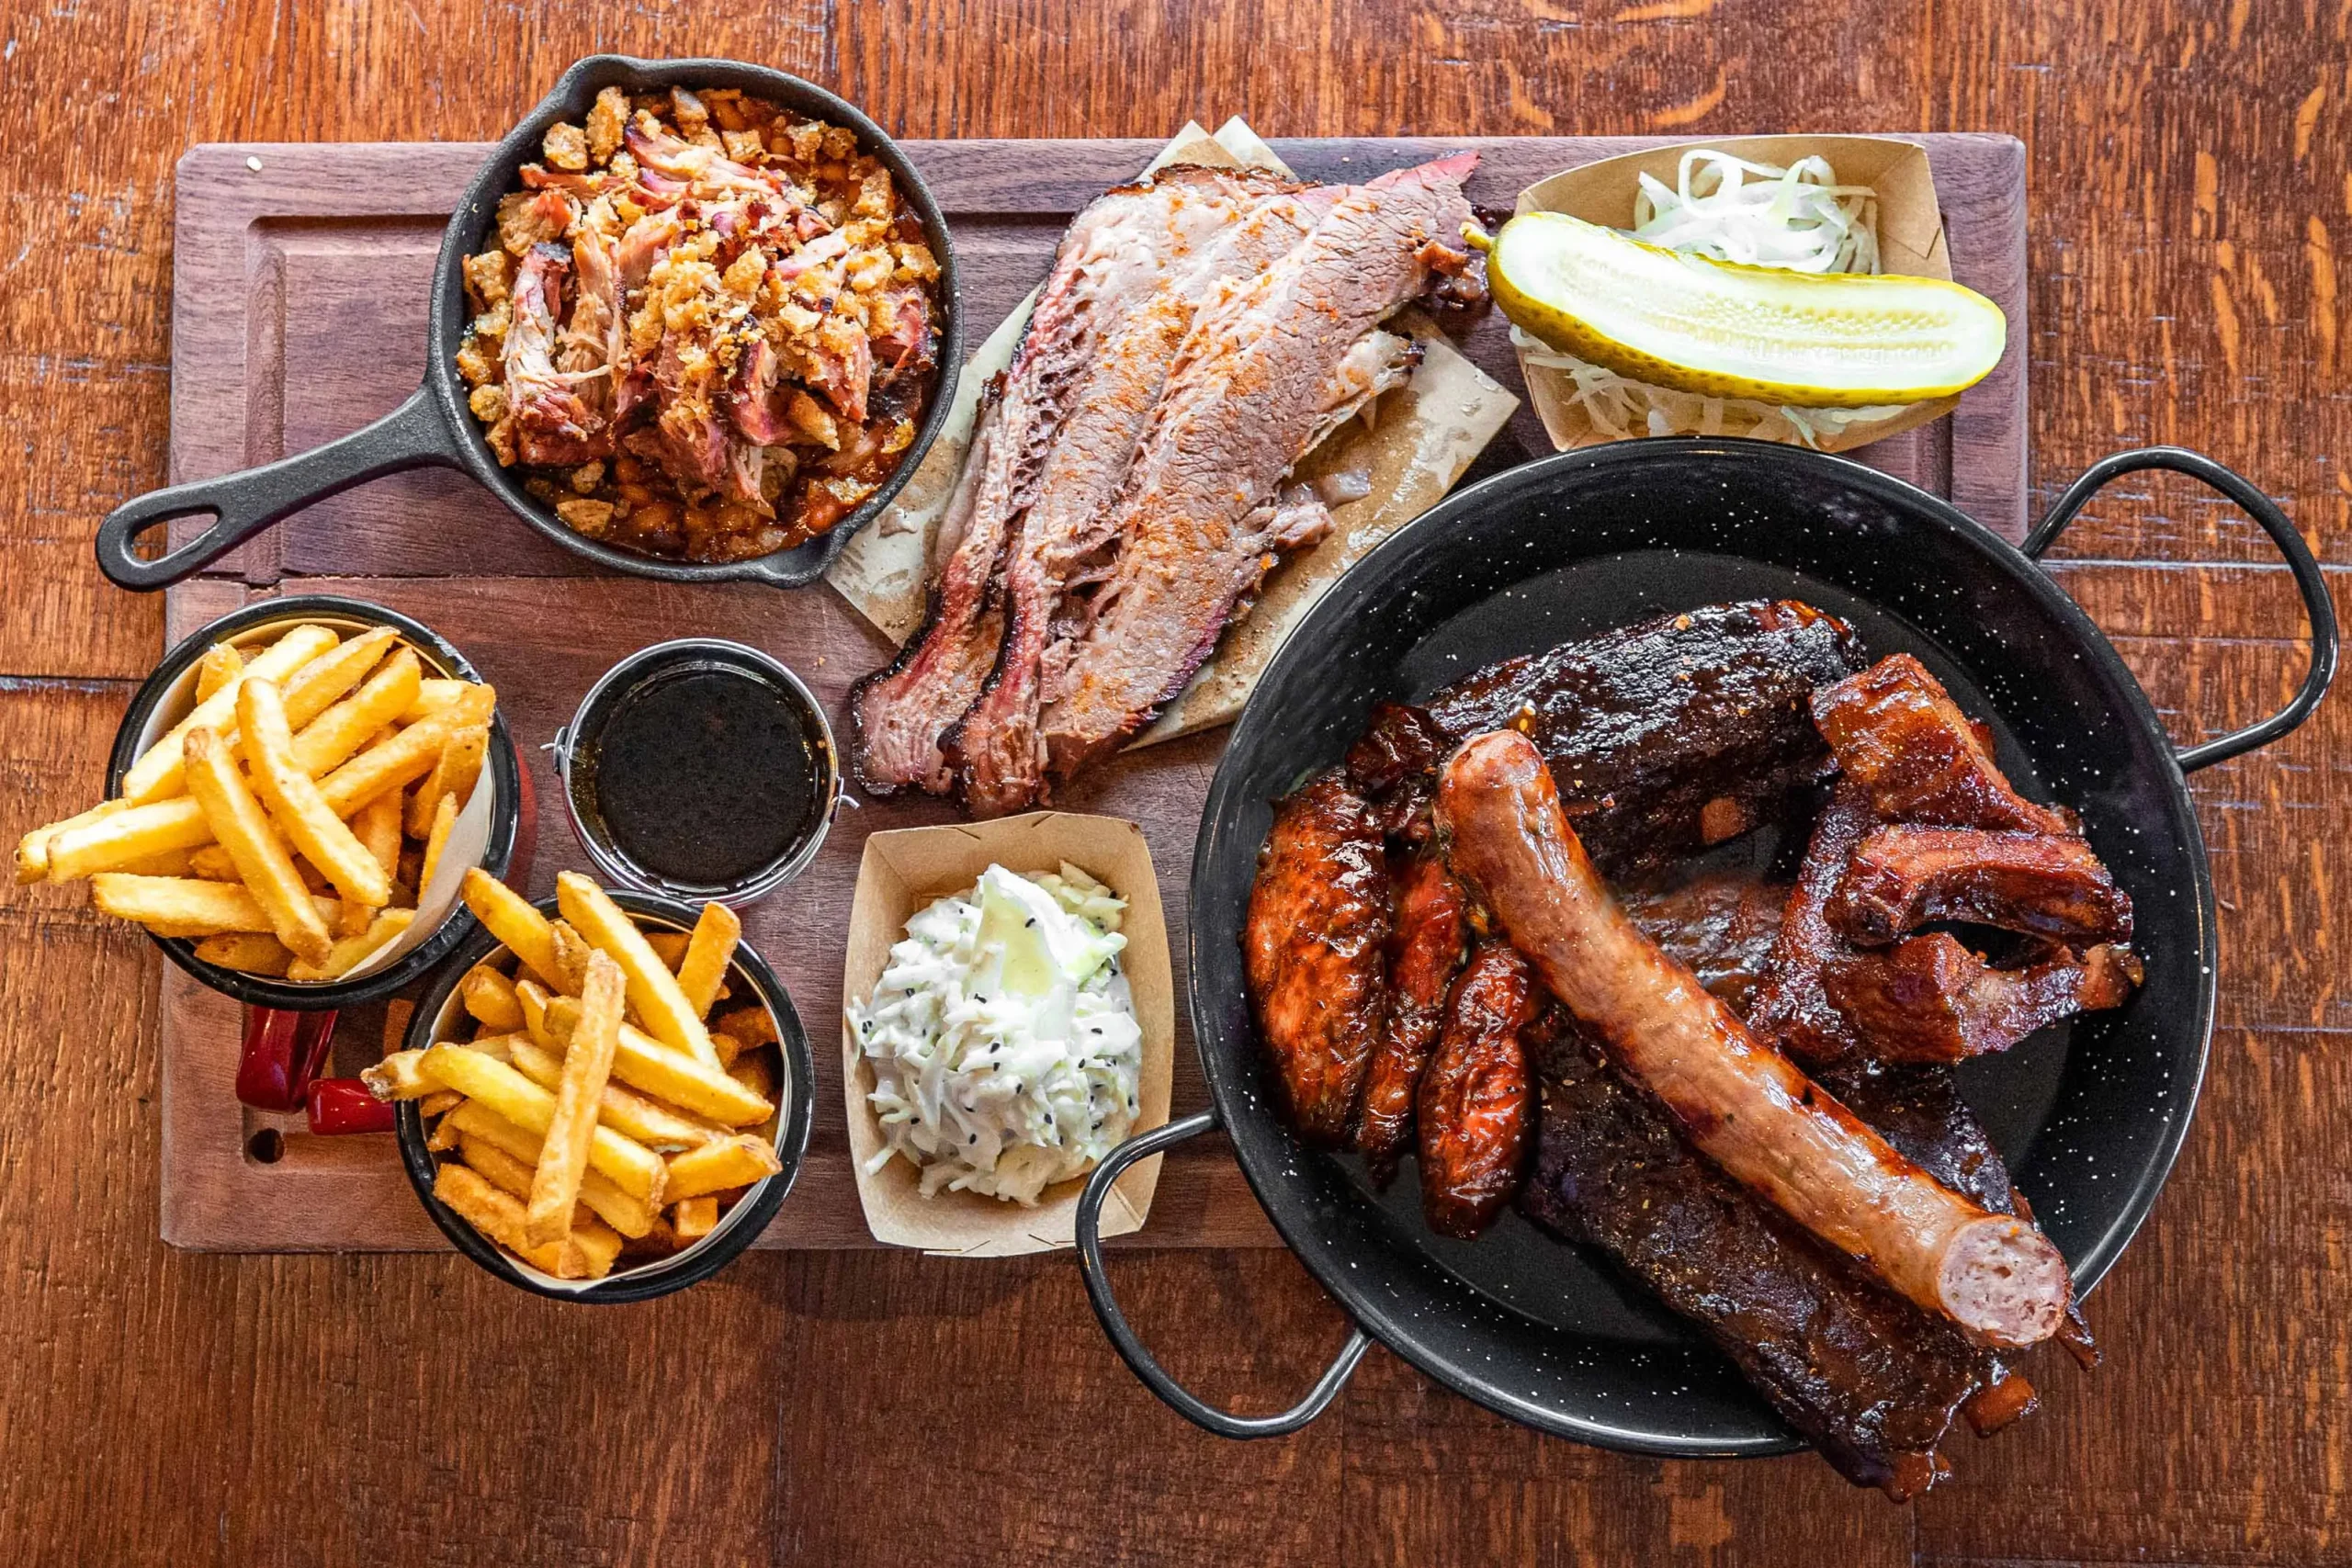 hickory smokehouse discount voucher - Is a voucher a promo code